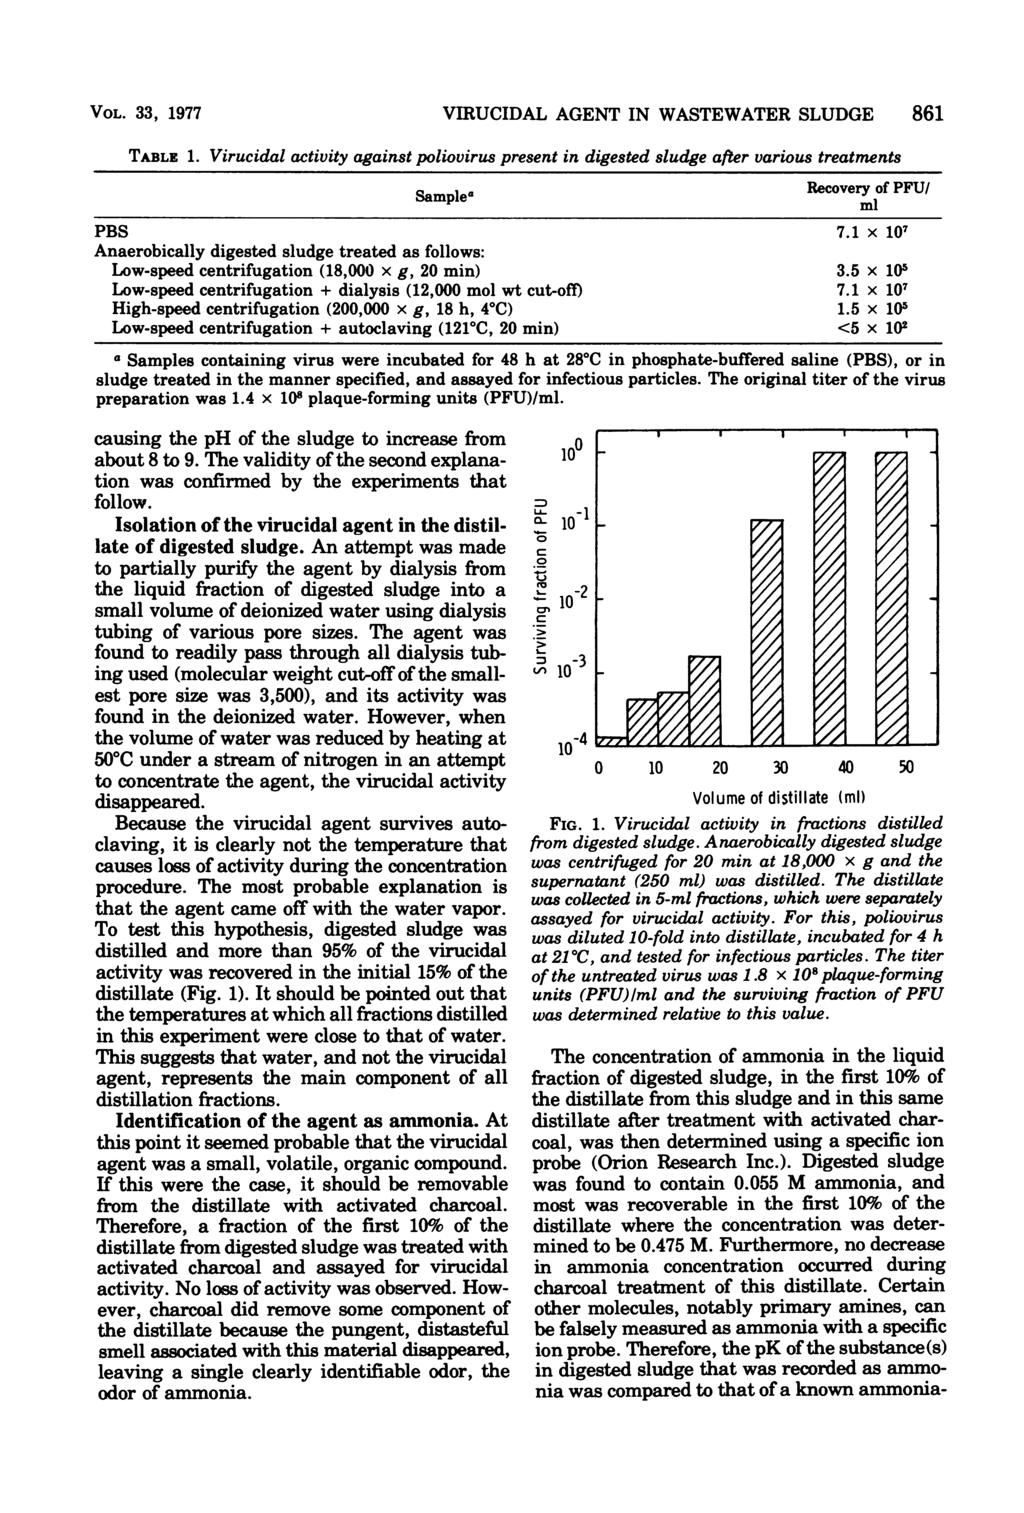 VOL. 33, 1977 TABLE 1. VIRUCIDAL AGENT IN WASTEWATER SLUDGE 861 Virucidal activity against poliovirus present in digested sludge after various treatments Samplea Recovery of PFU/ ml PBS 7.